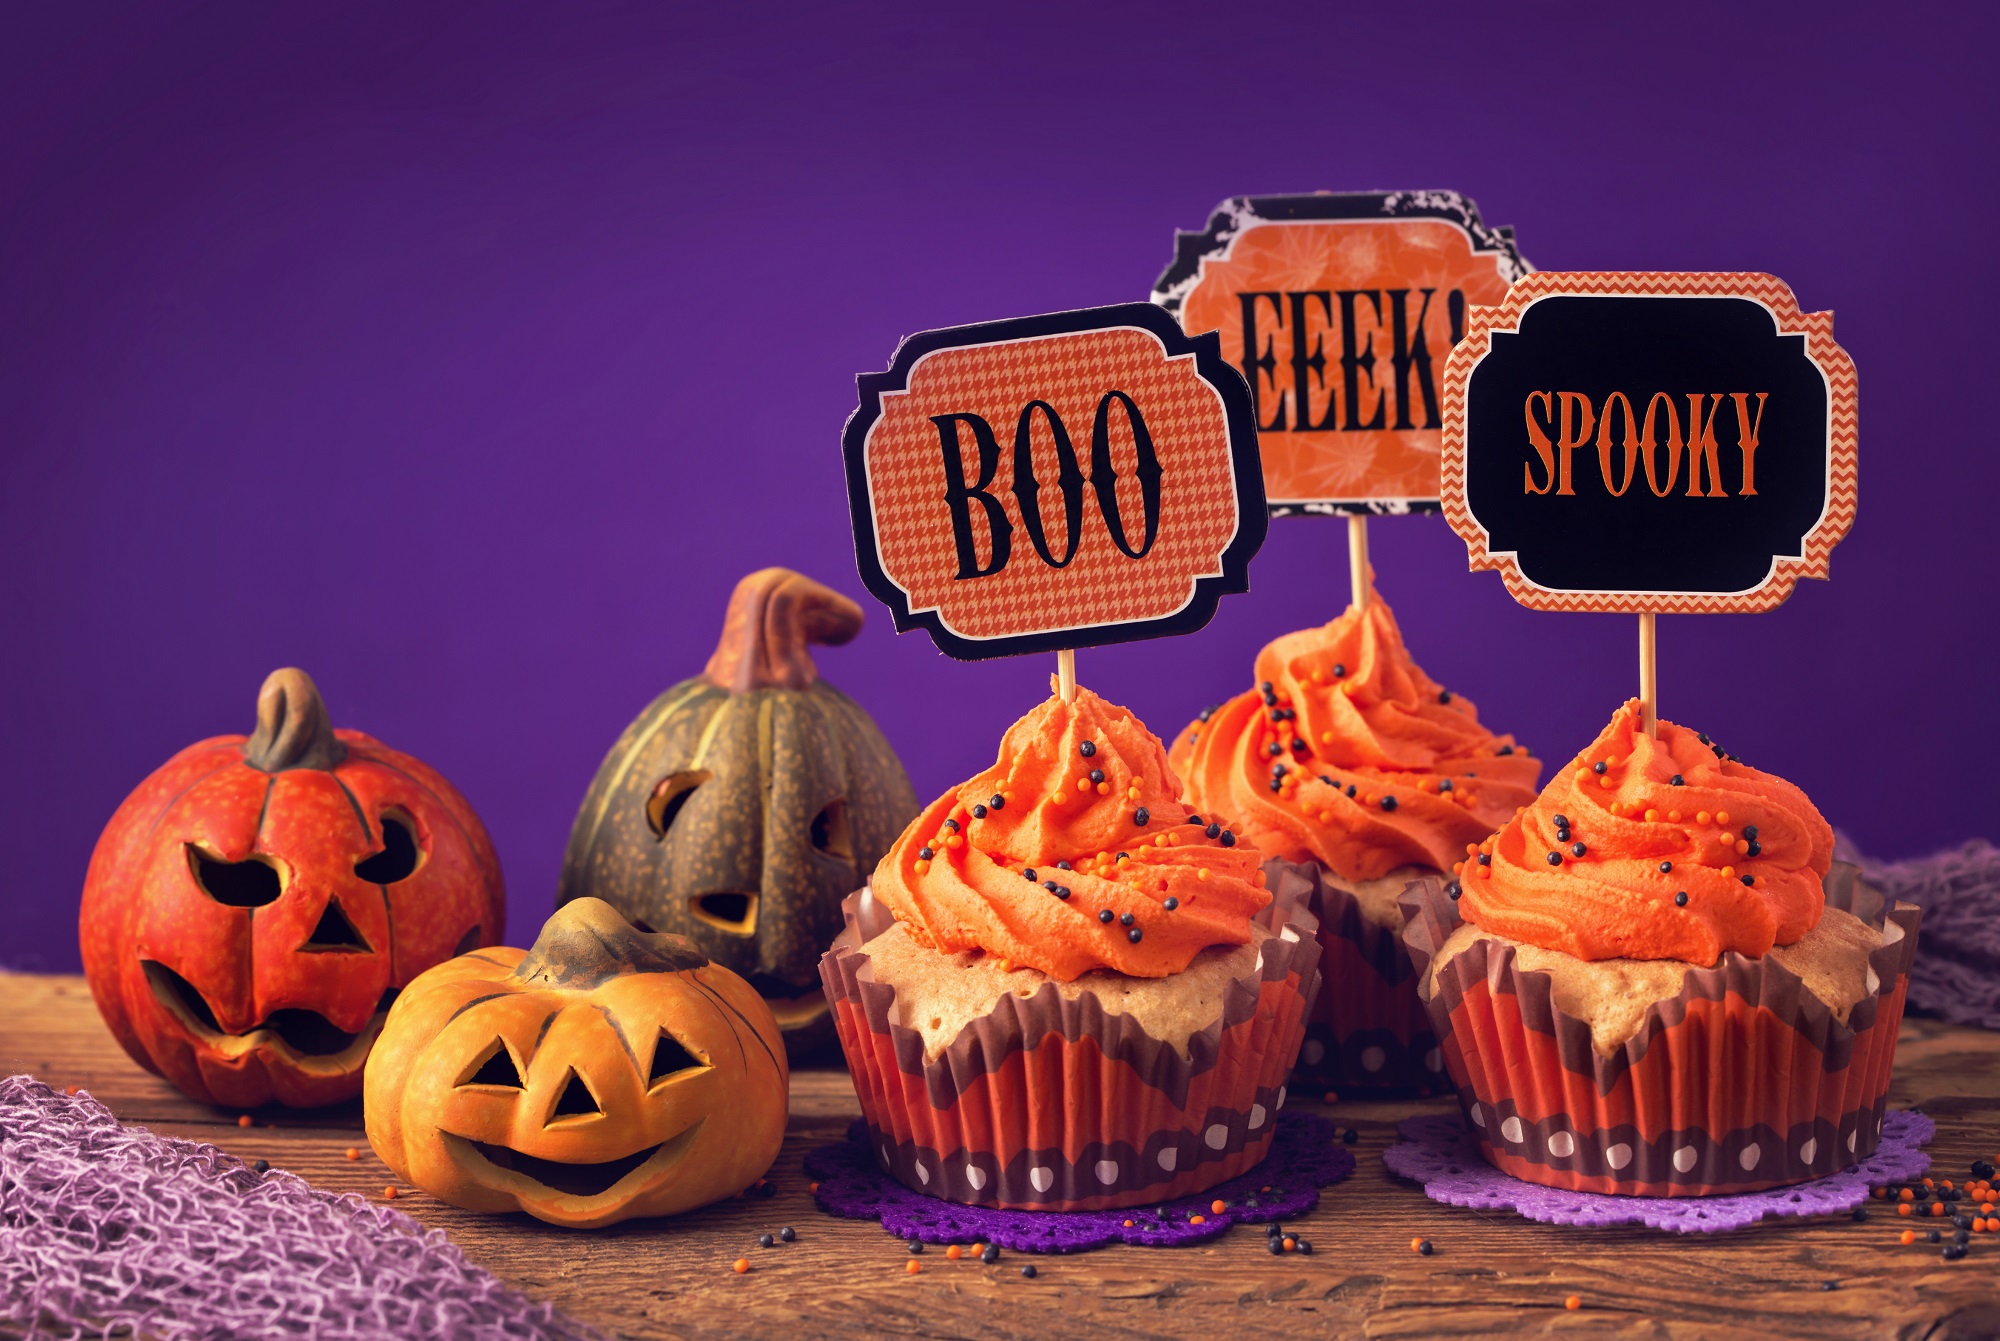 Orange Cupcakes with Halloween Signs